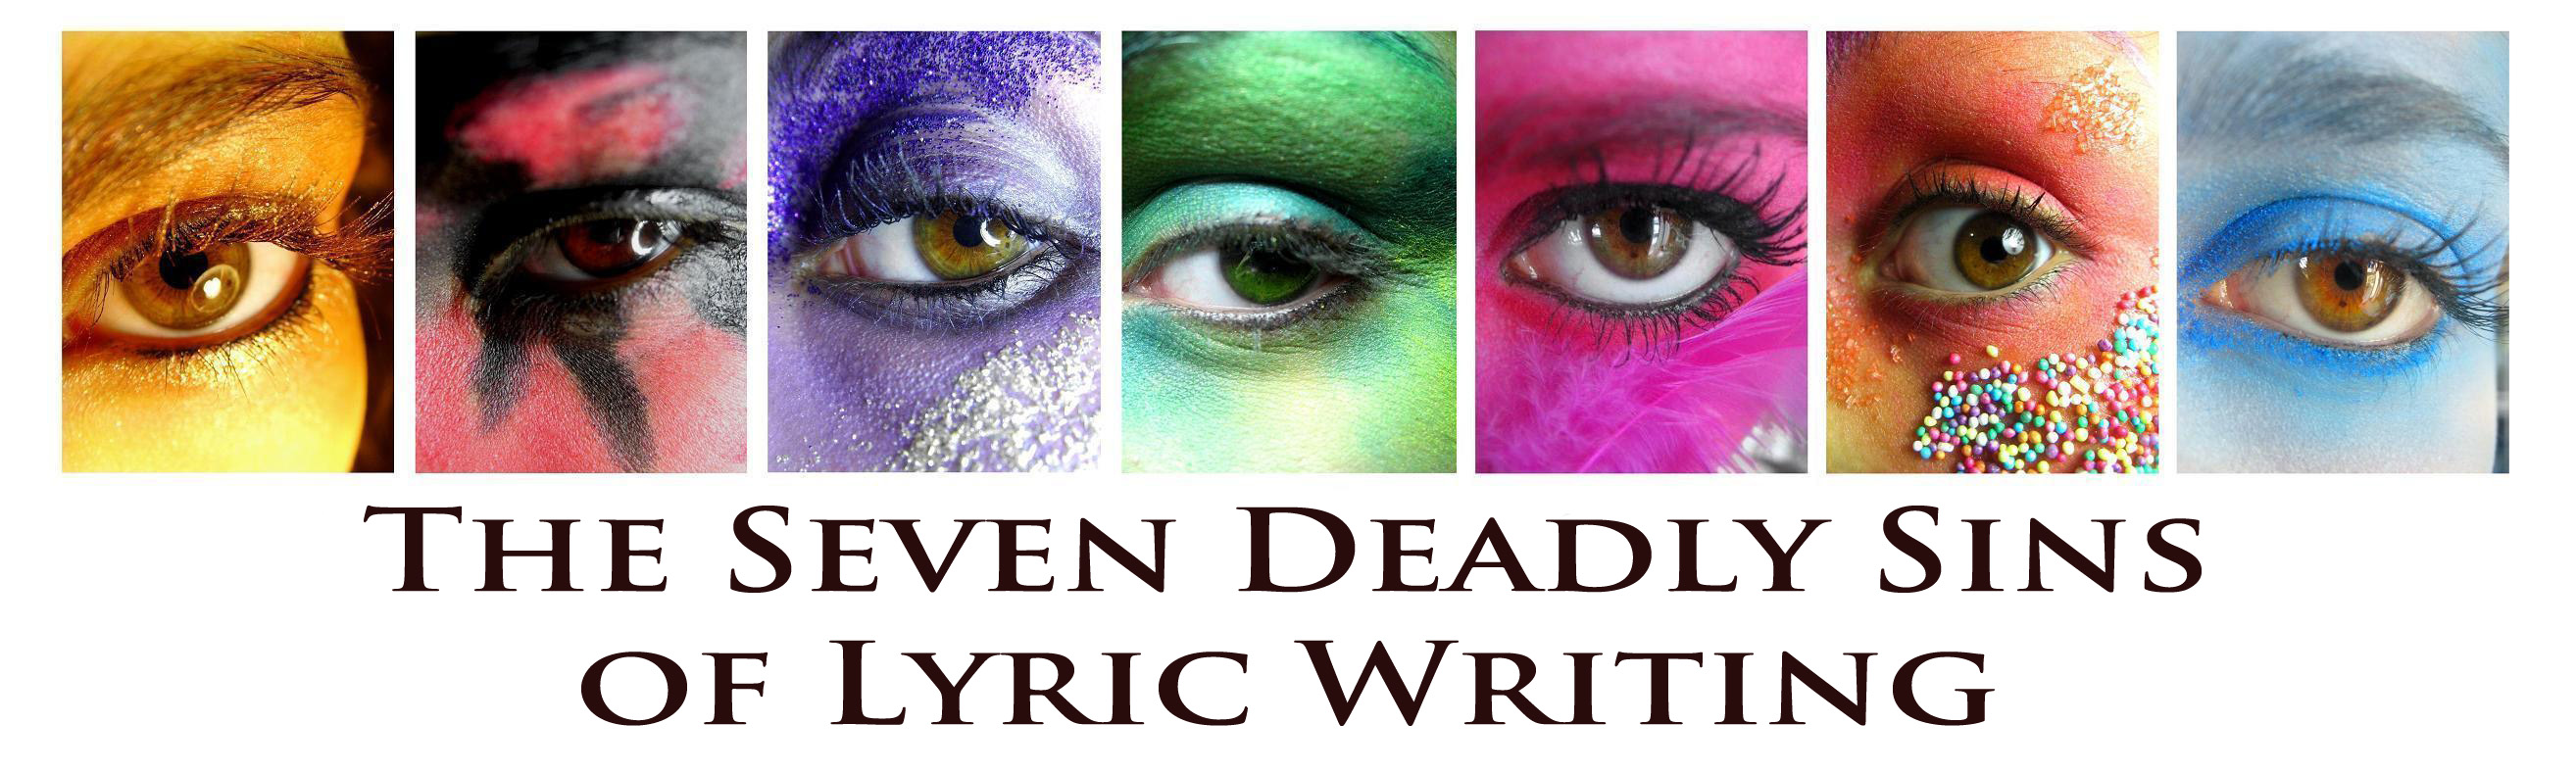 seven deadly sins of lyric writing